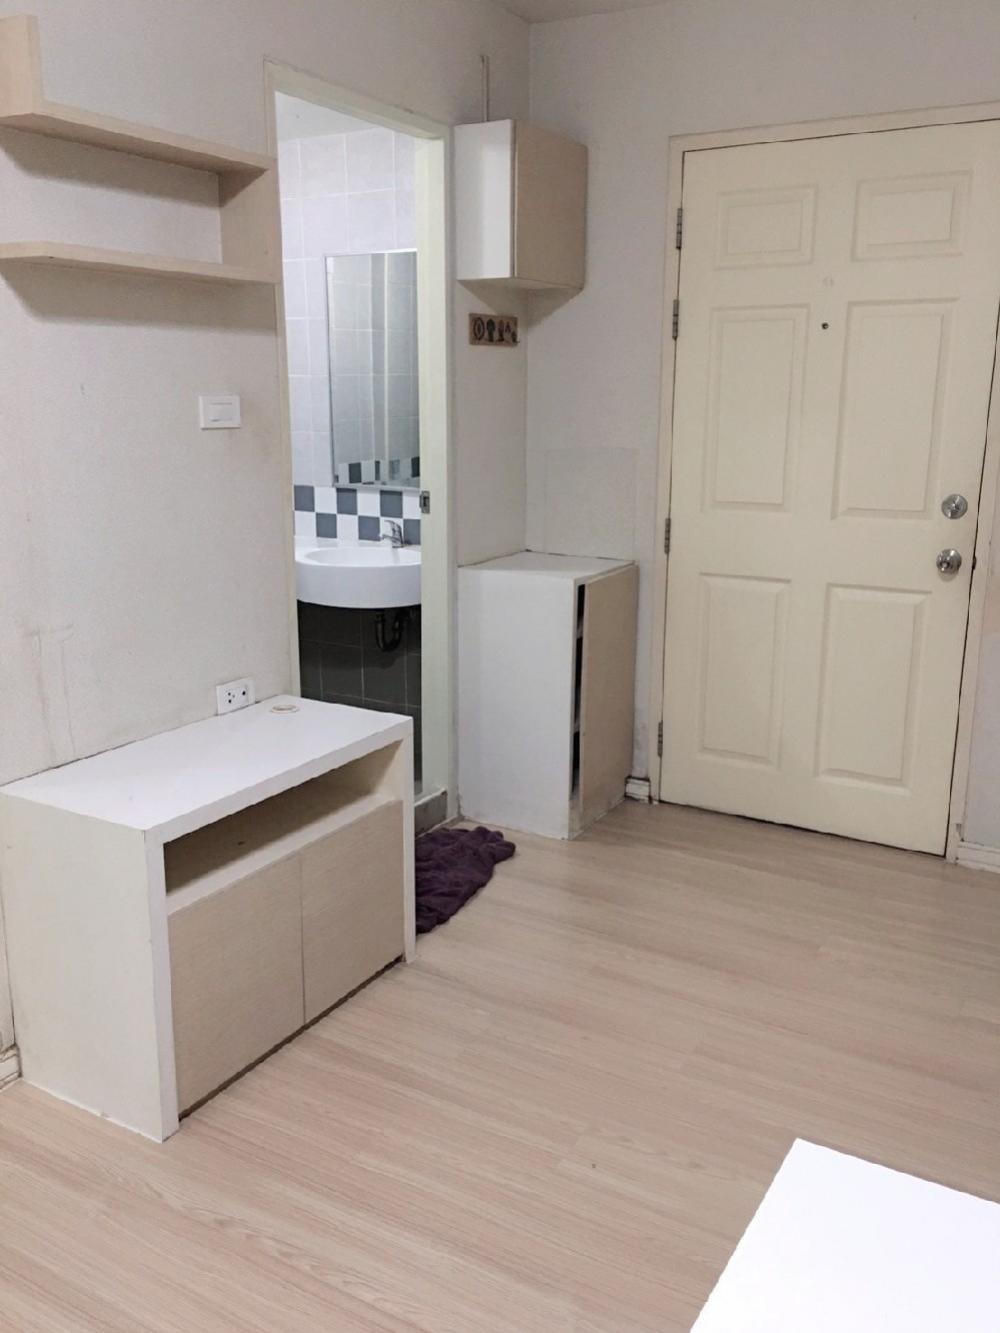 For RentCondoNawamin, Ramindra : (Ready to move in) Condo for rent, Lumpini View Ramintra-Laksi, studio room, 1 bedroom, 1 bathroom, 1 balcony. (A bird cage has been installed) Only 6,500 ฿, next to the train, next to Central Department Store, complete furniture, bed size 5 feet, wardrob